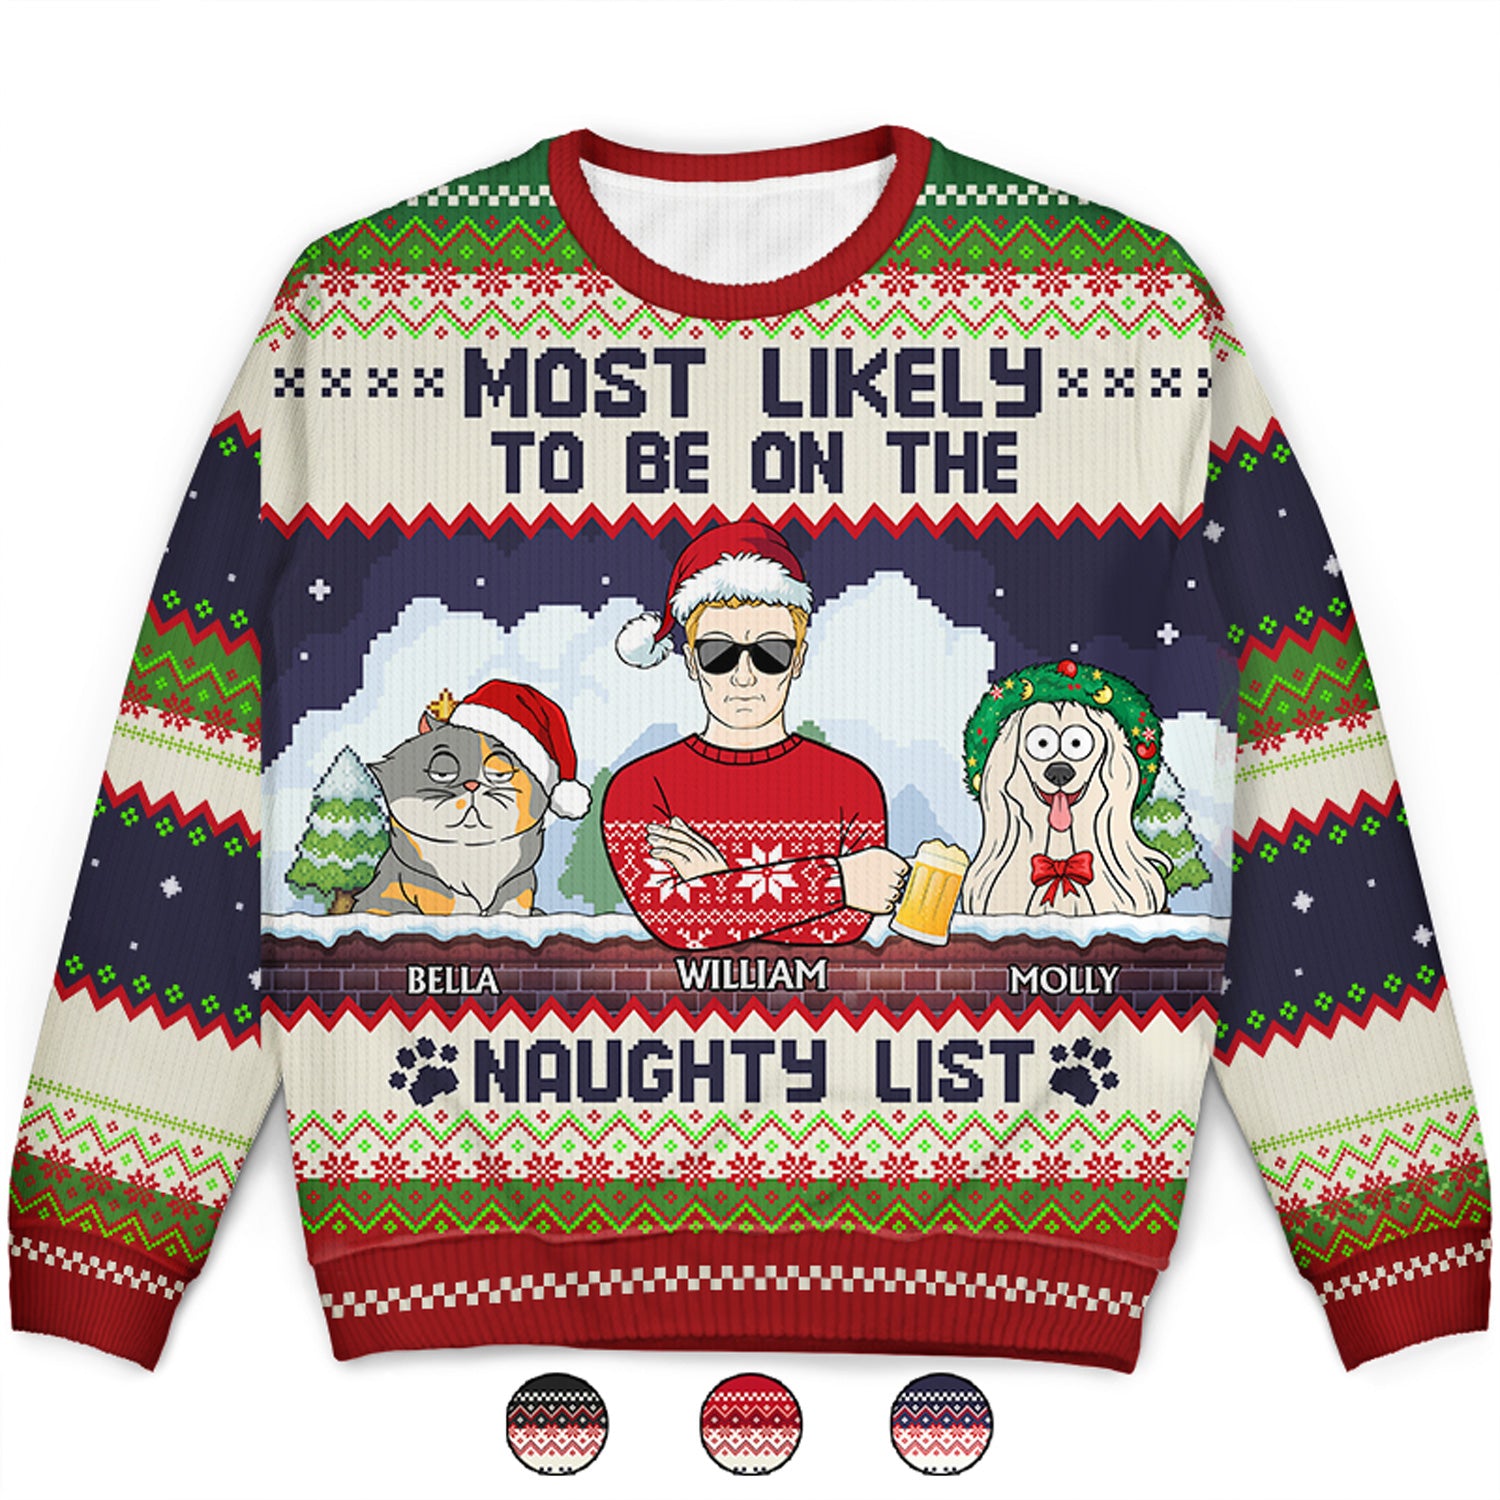 Most Likely To Be On The Naughty List - Christmas Gifts For Dog Lovers, Cat Lovers - Personalized Unisex Ugly Sweater